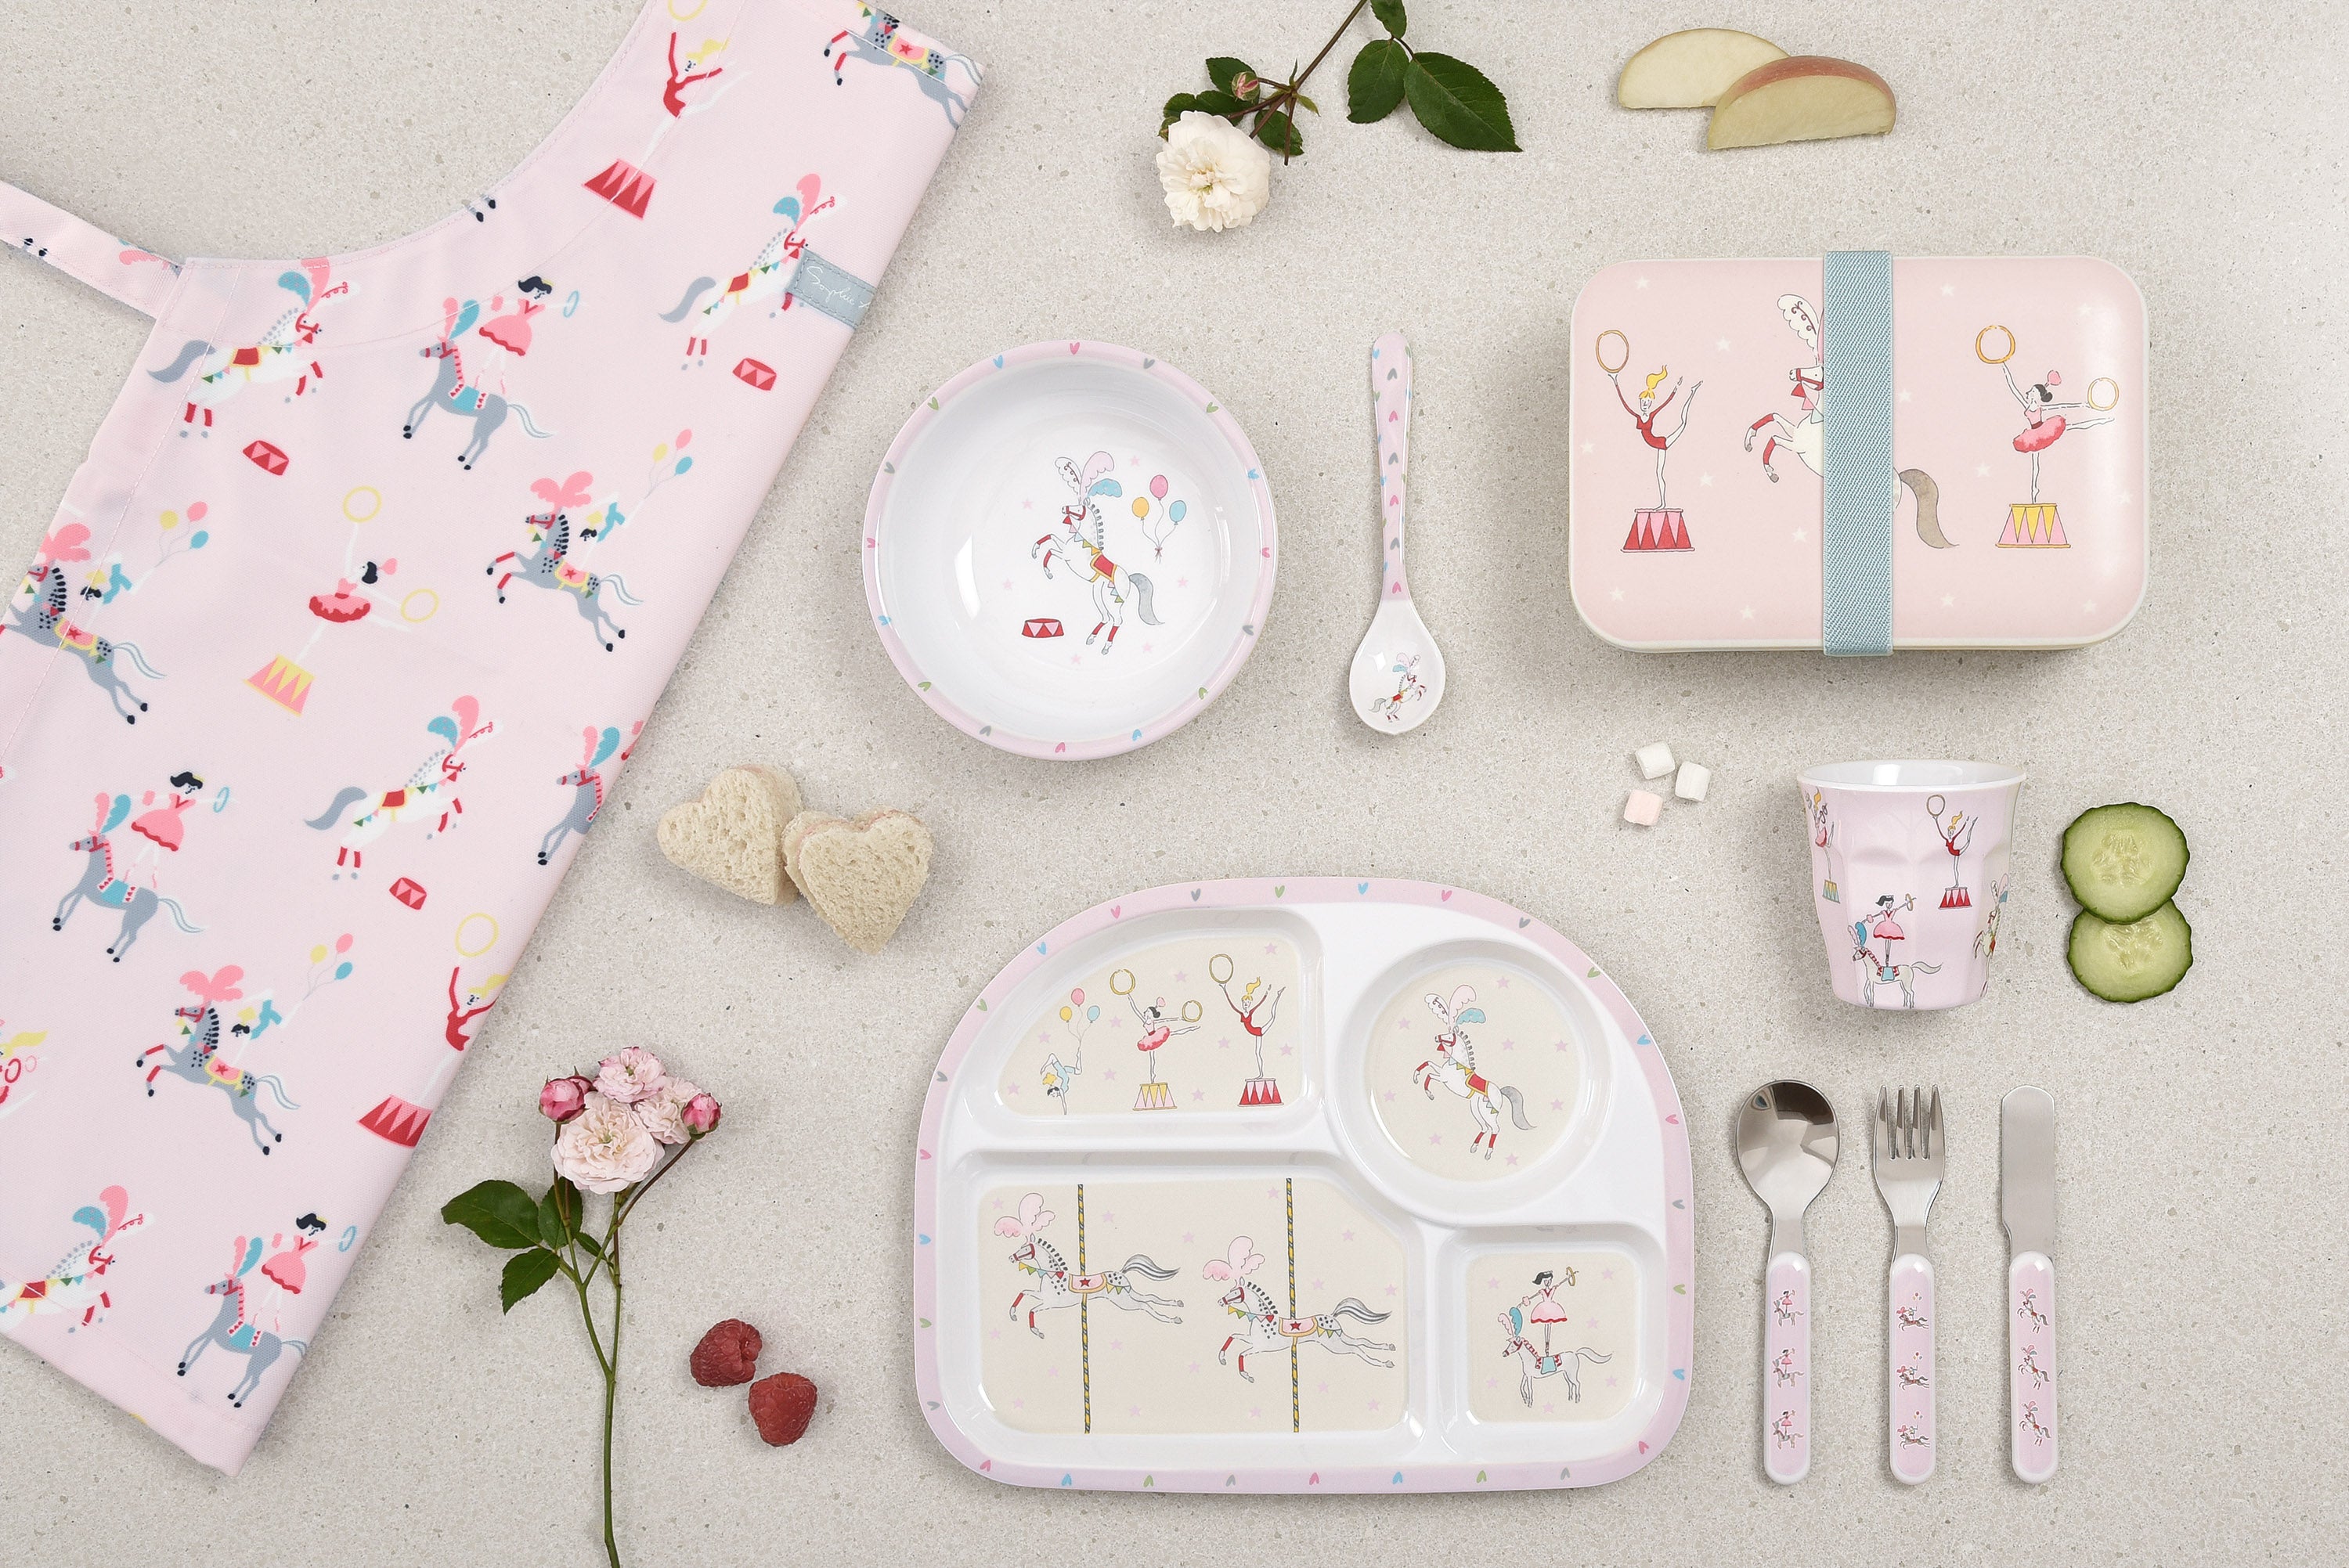 New children's collection by Sophie Allport